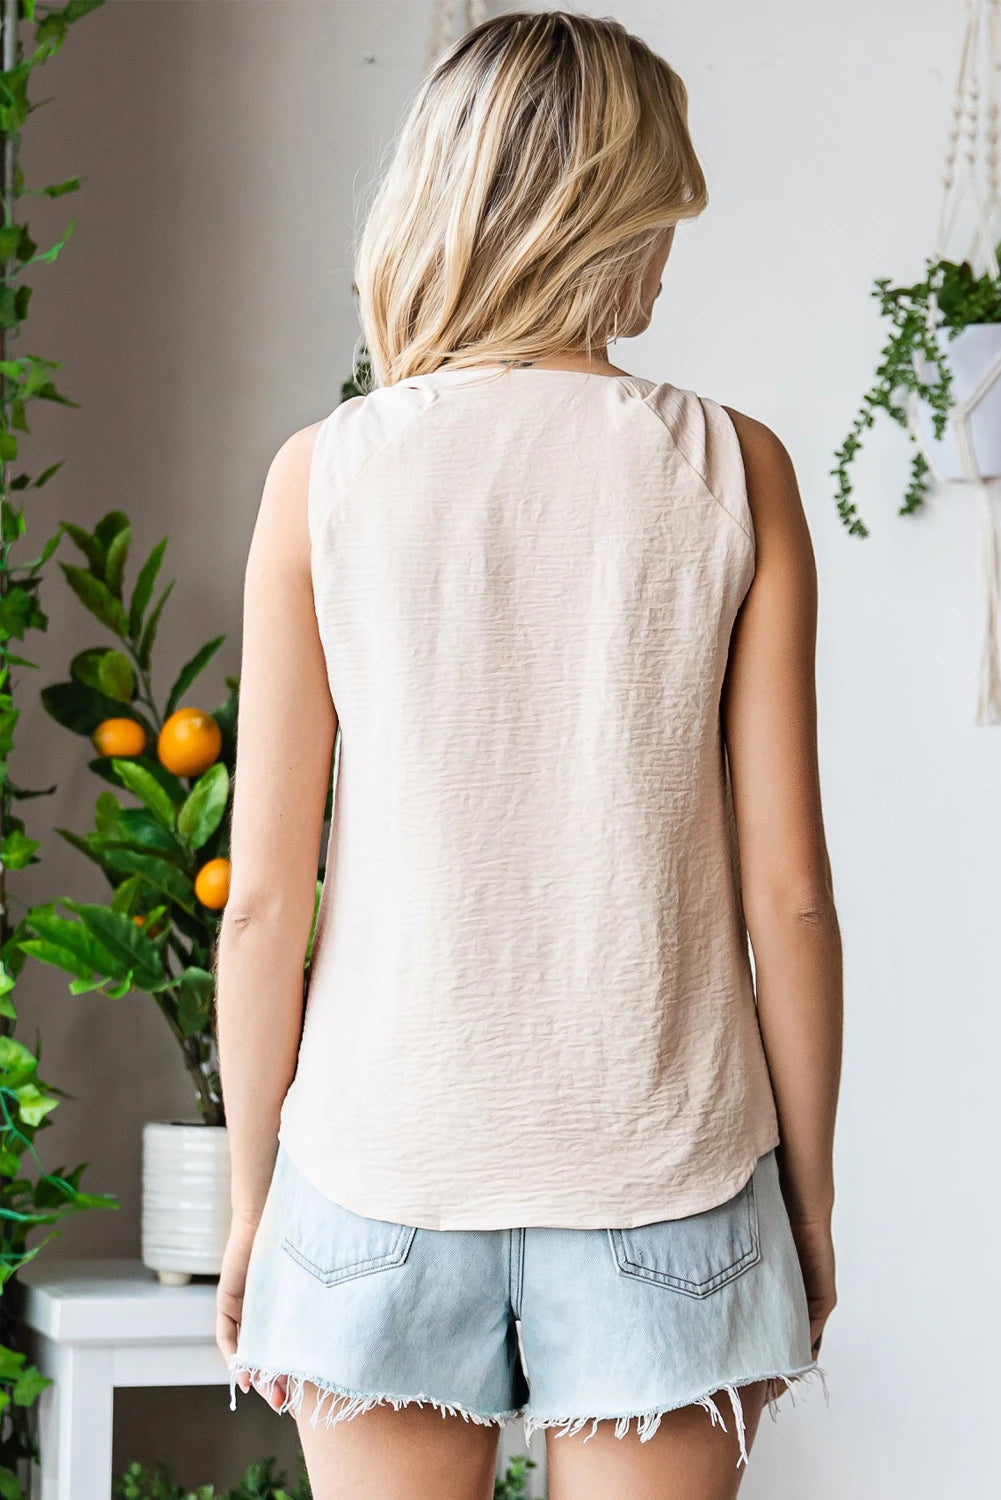 Khaki Casual Knotted Shoulder Top